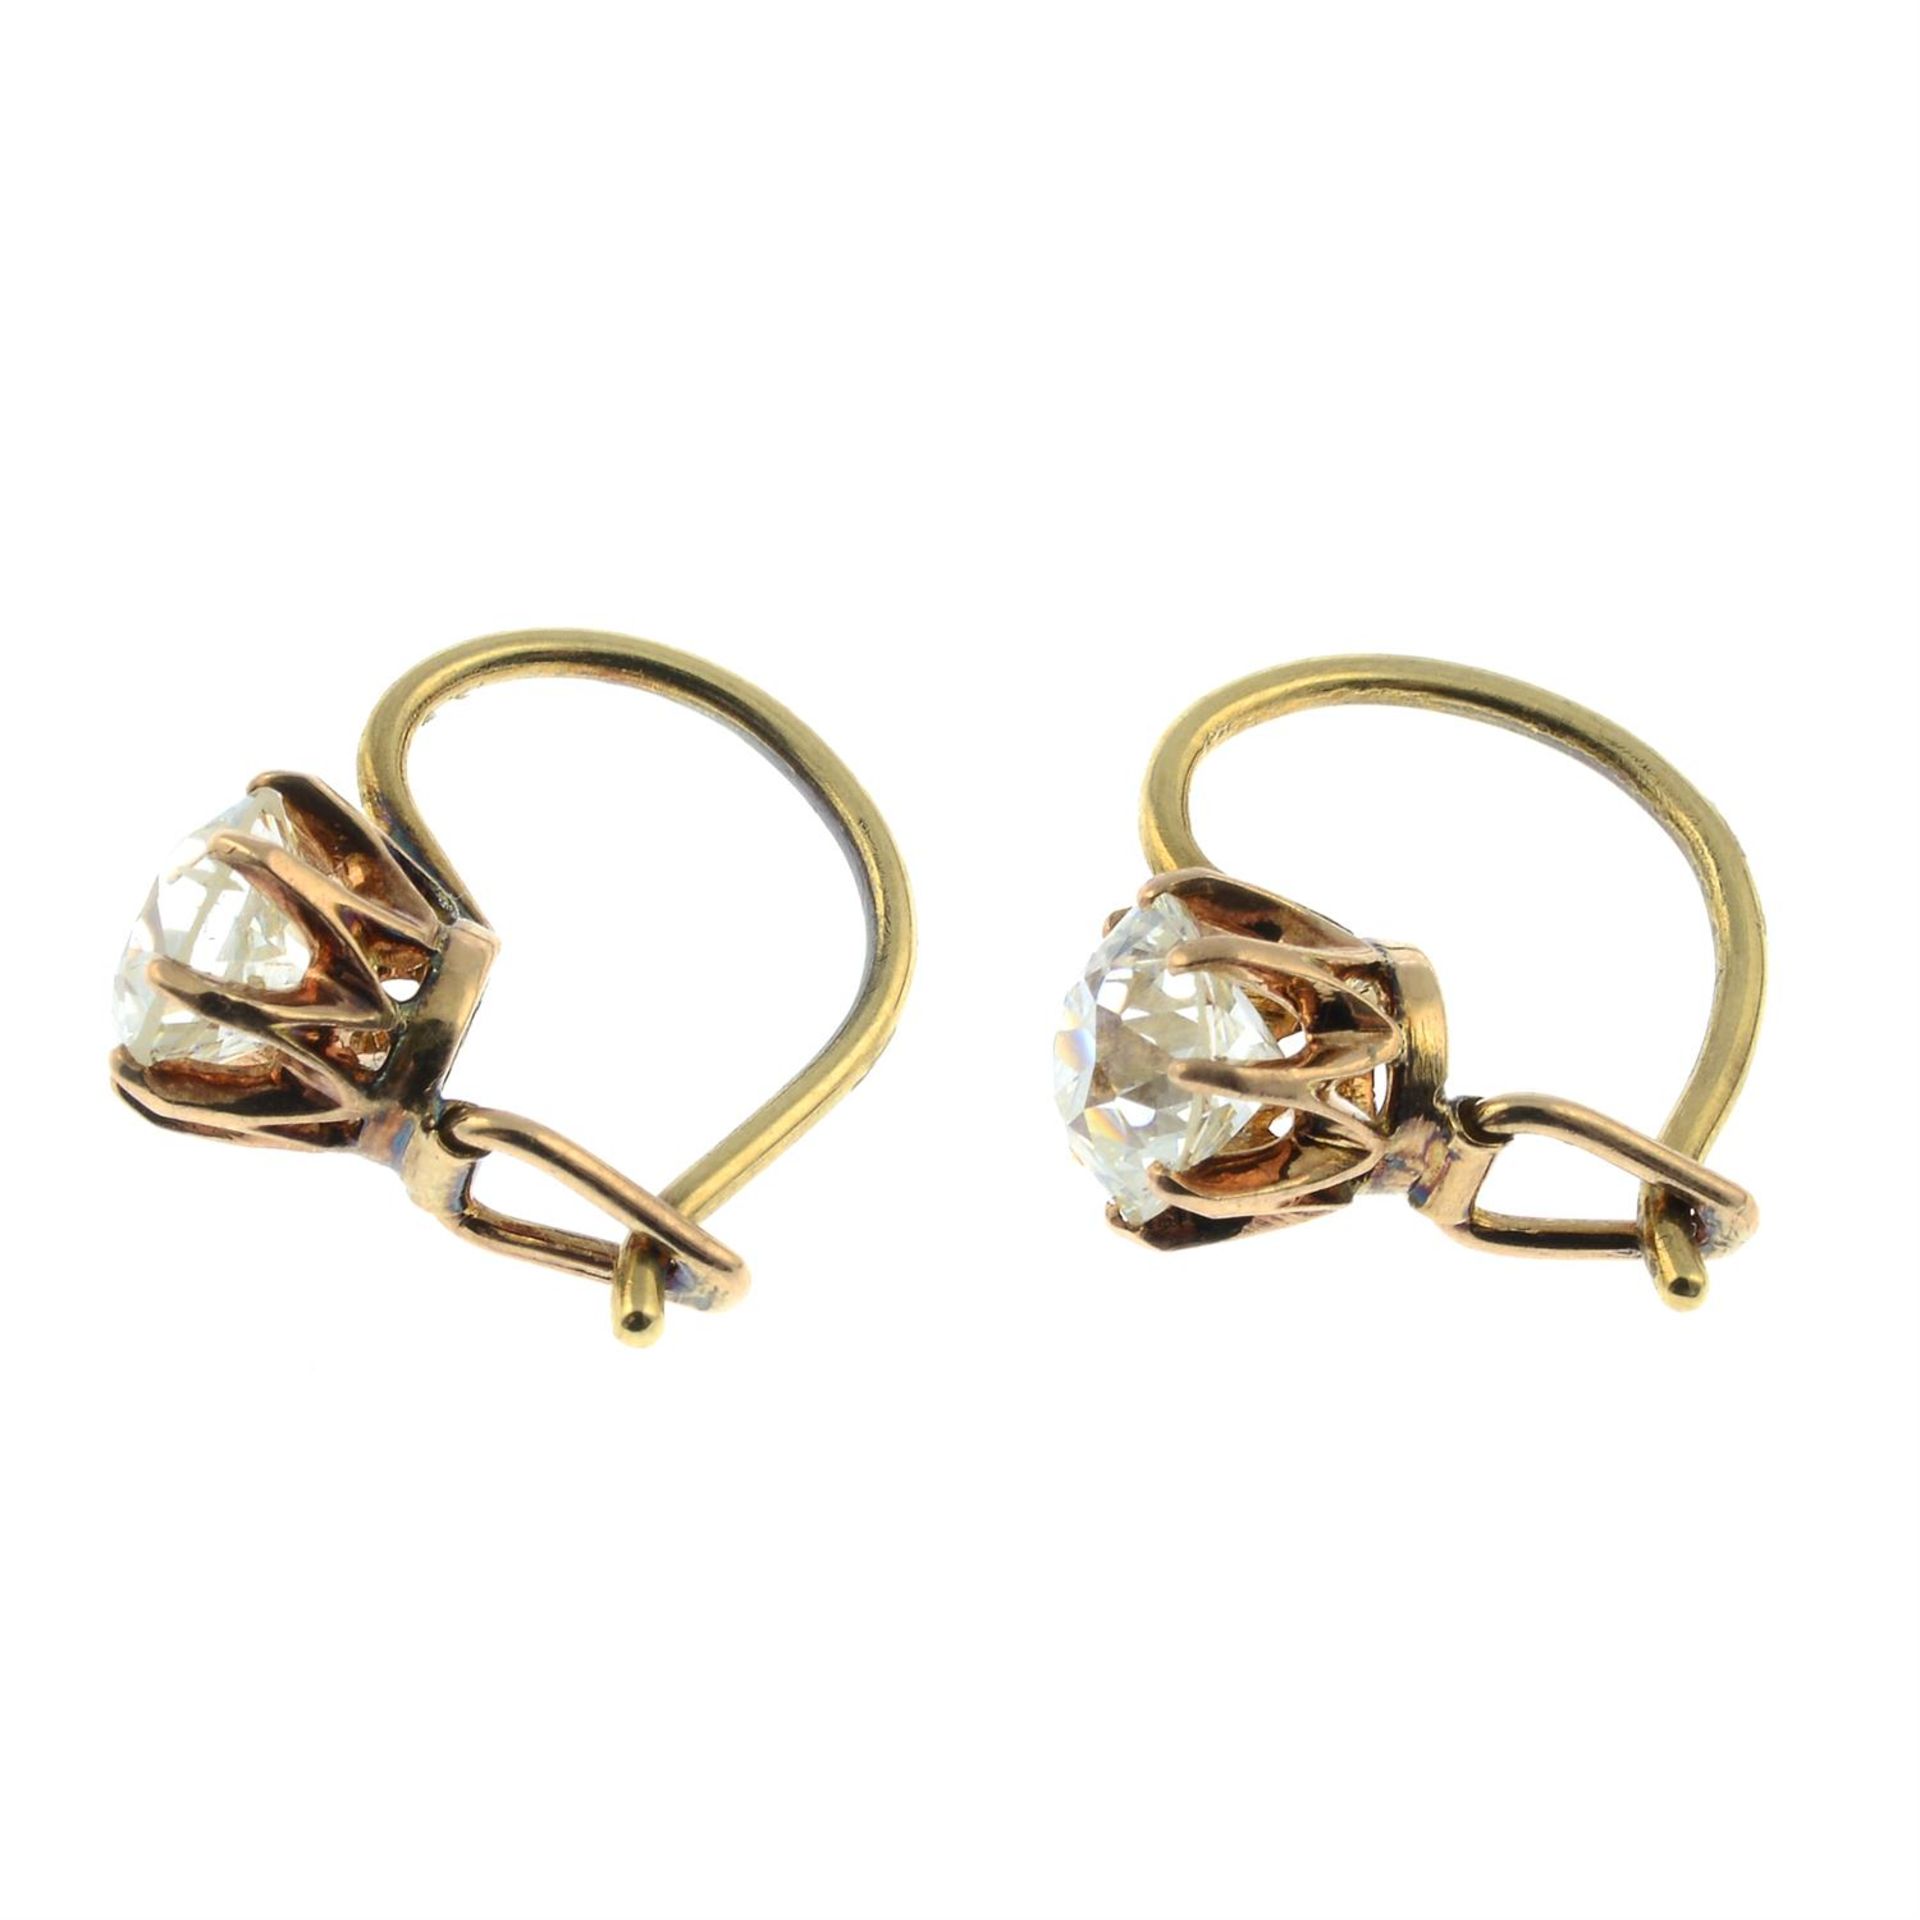 A pair of early 20th century gold old-cut diamond earrings. - Image 3 of 3